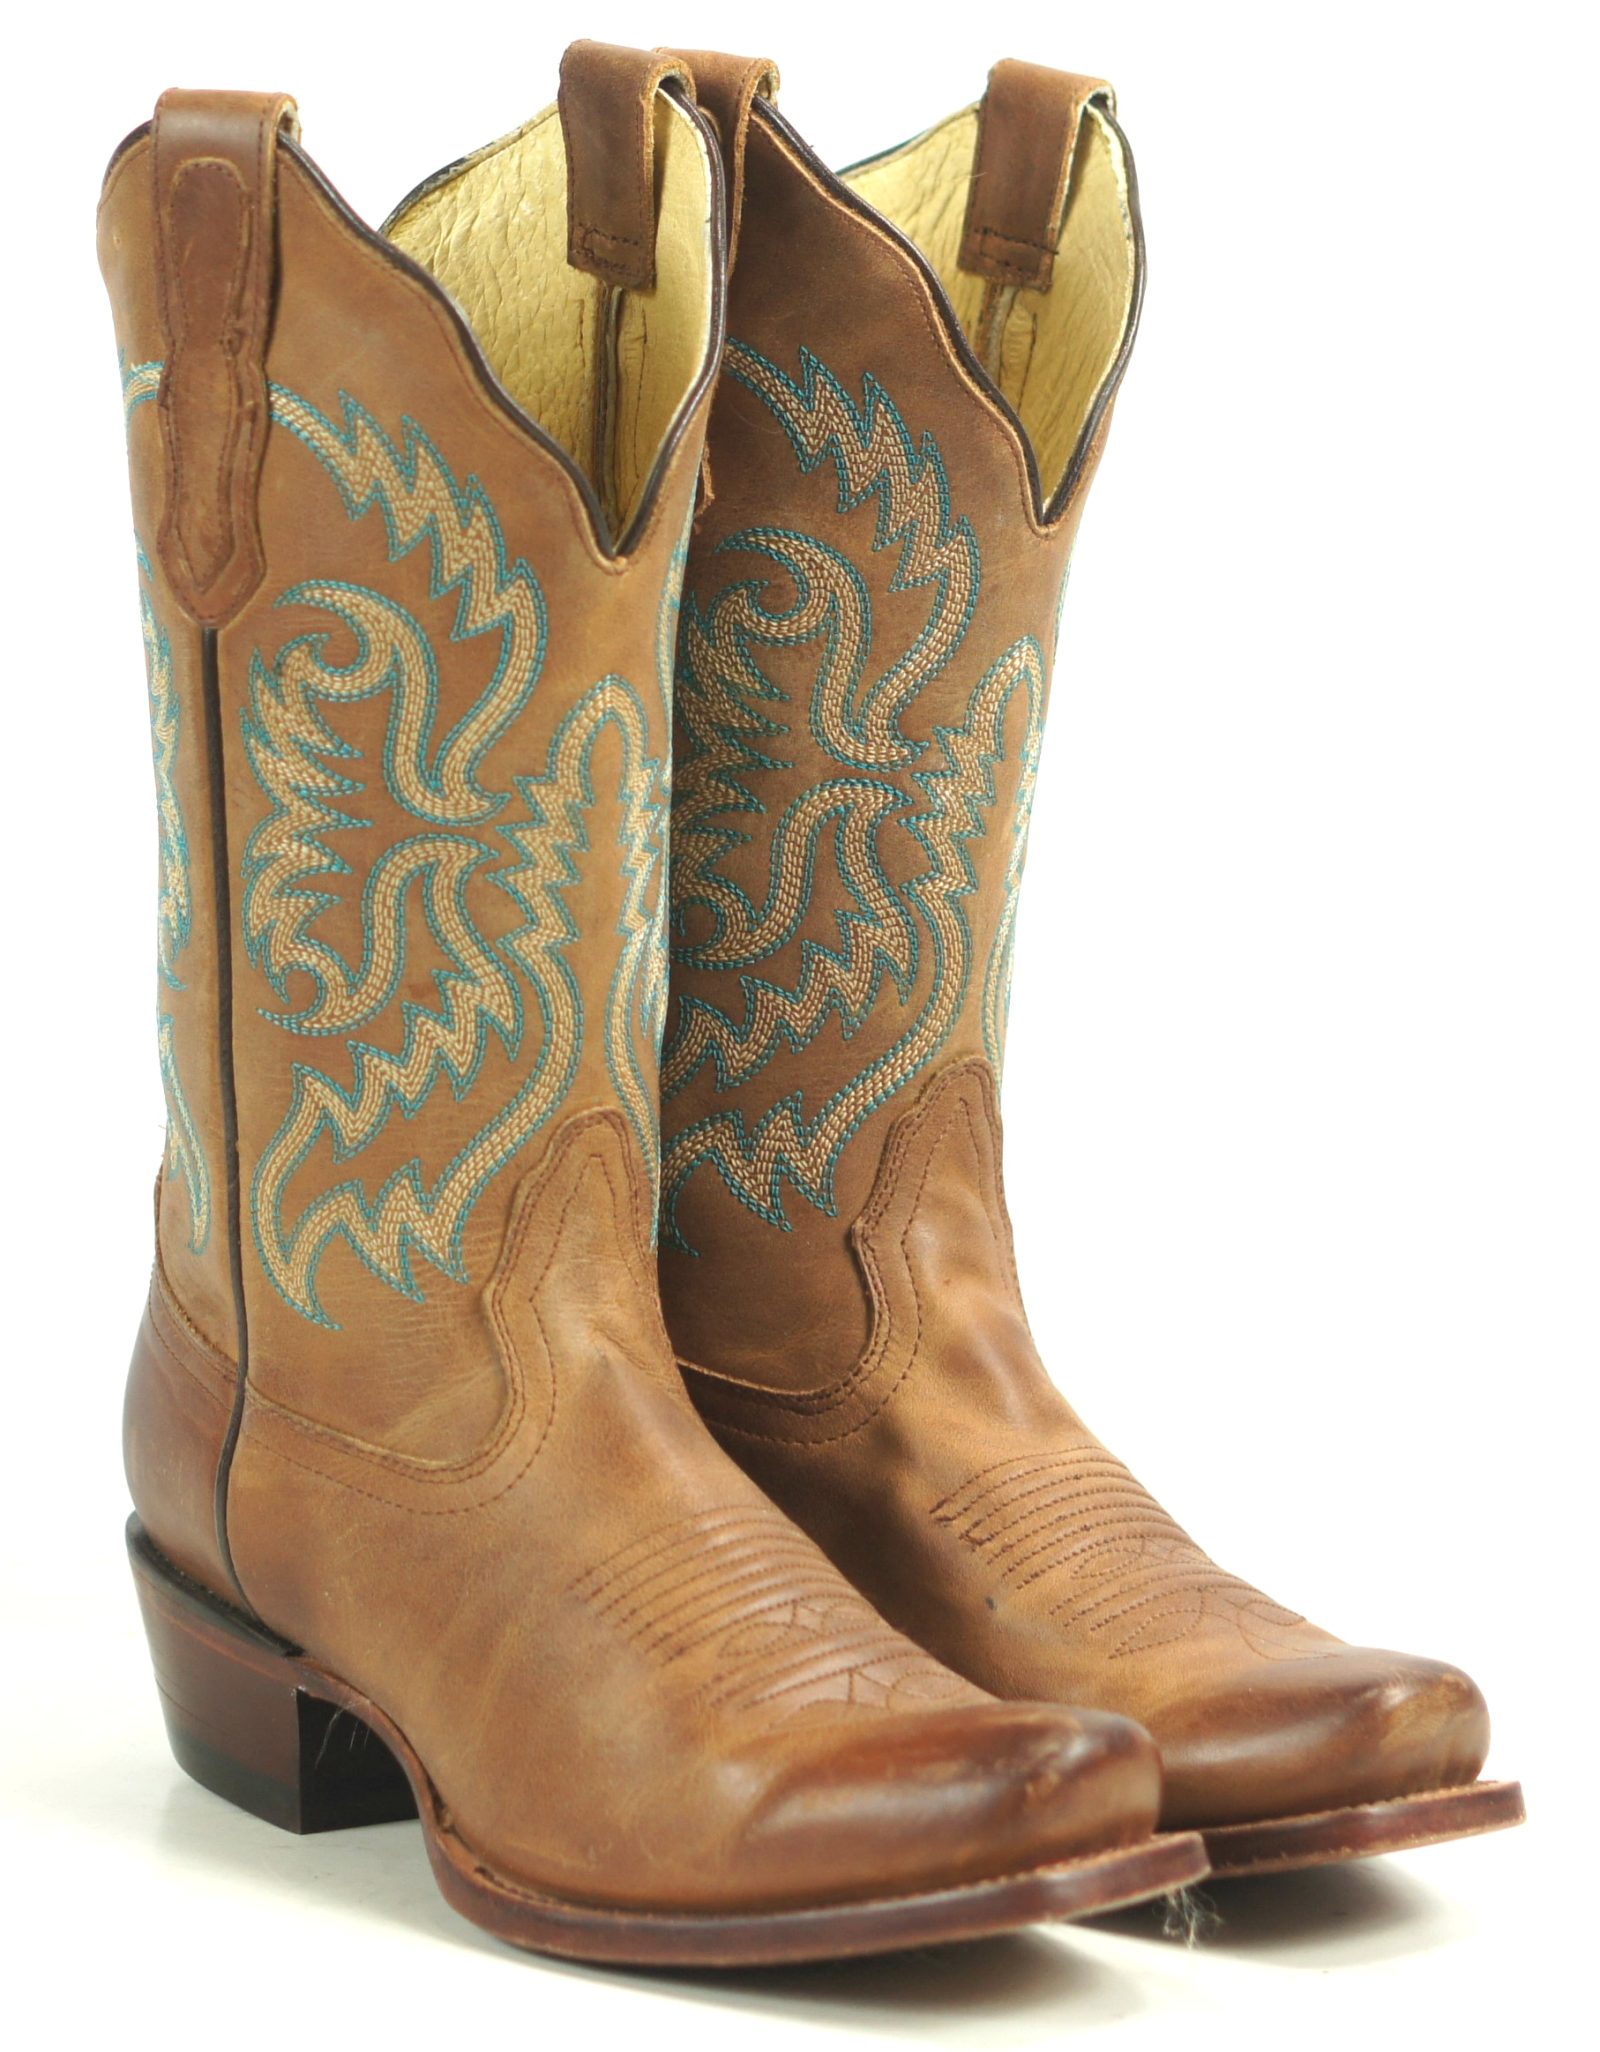 Nocona-Distressed-Brown-Leather-Cowboy-Boots-8-Row-Turquoise-Stitch-Womens-